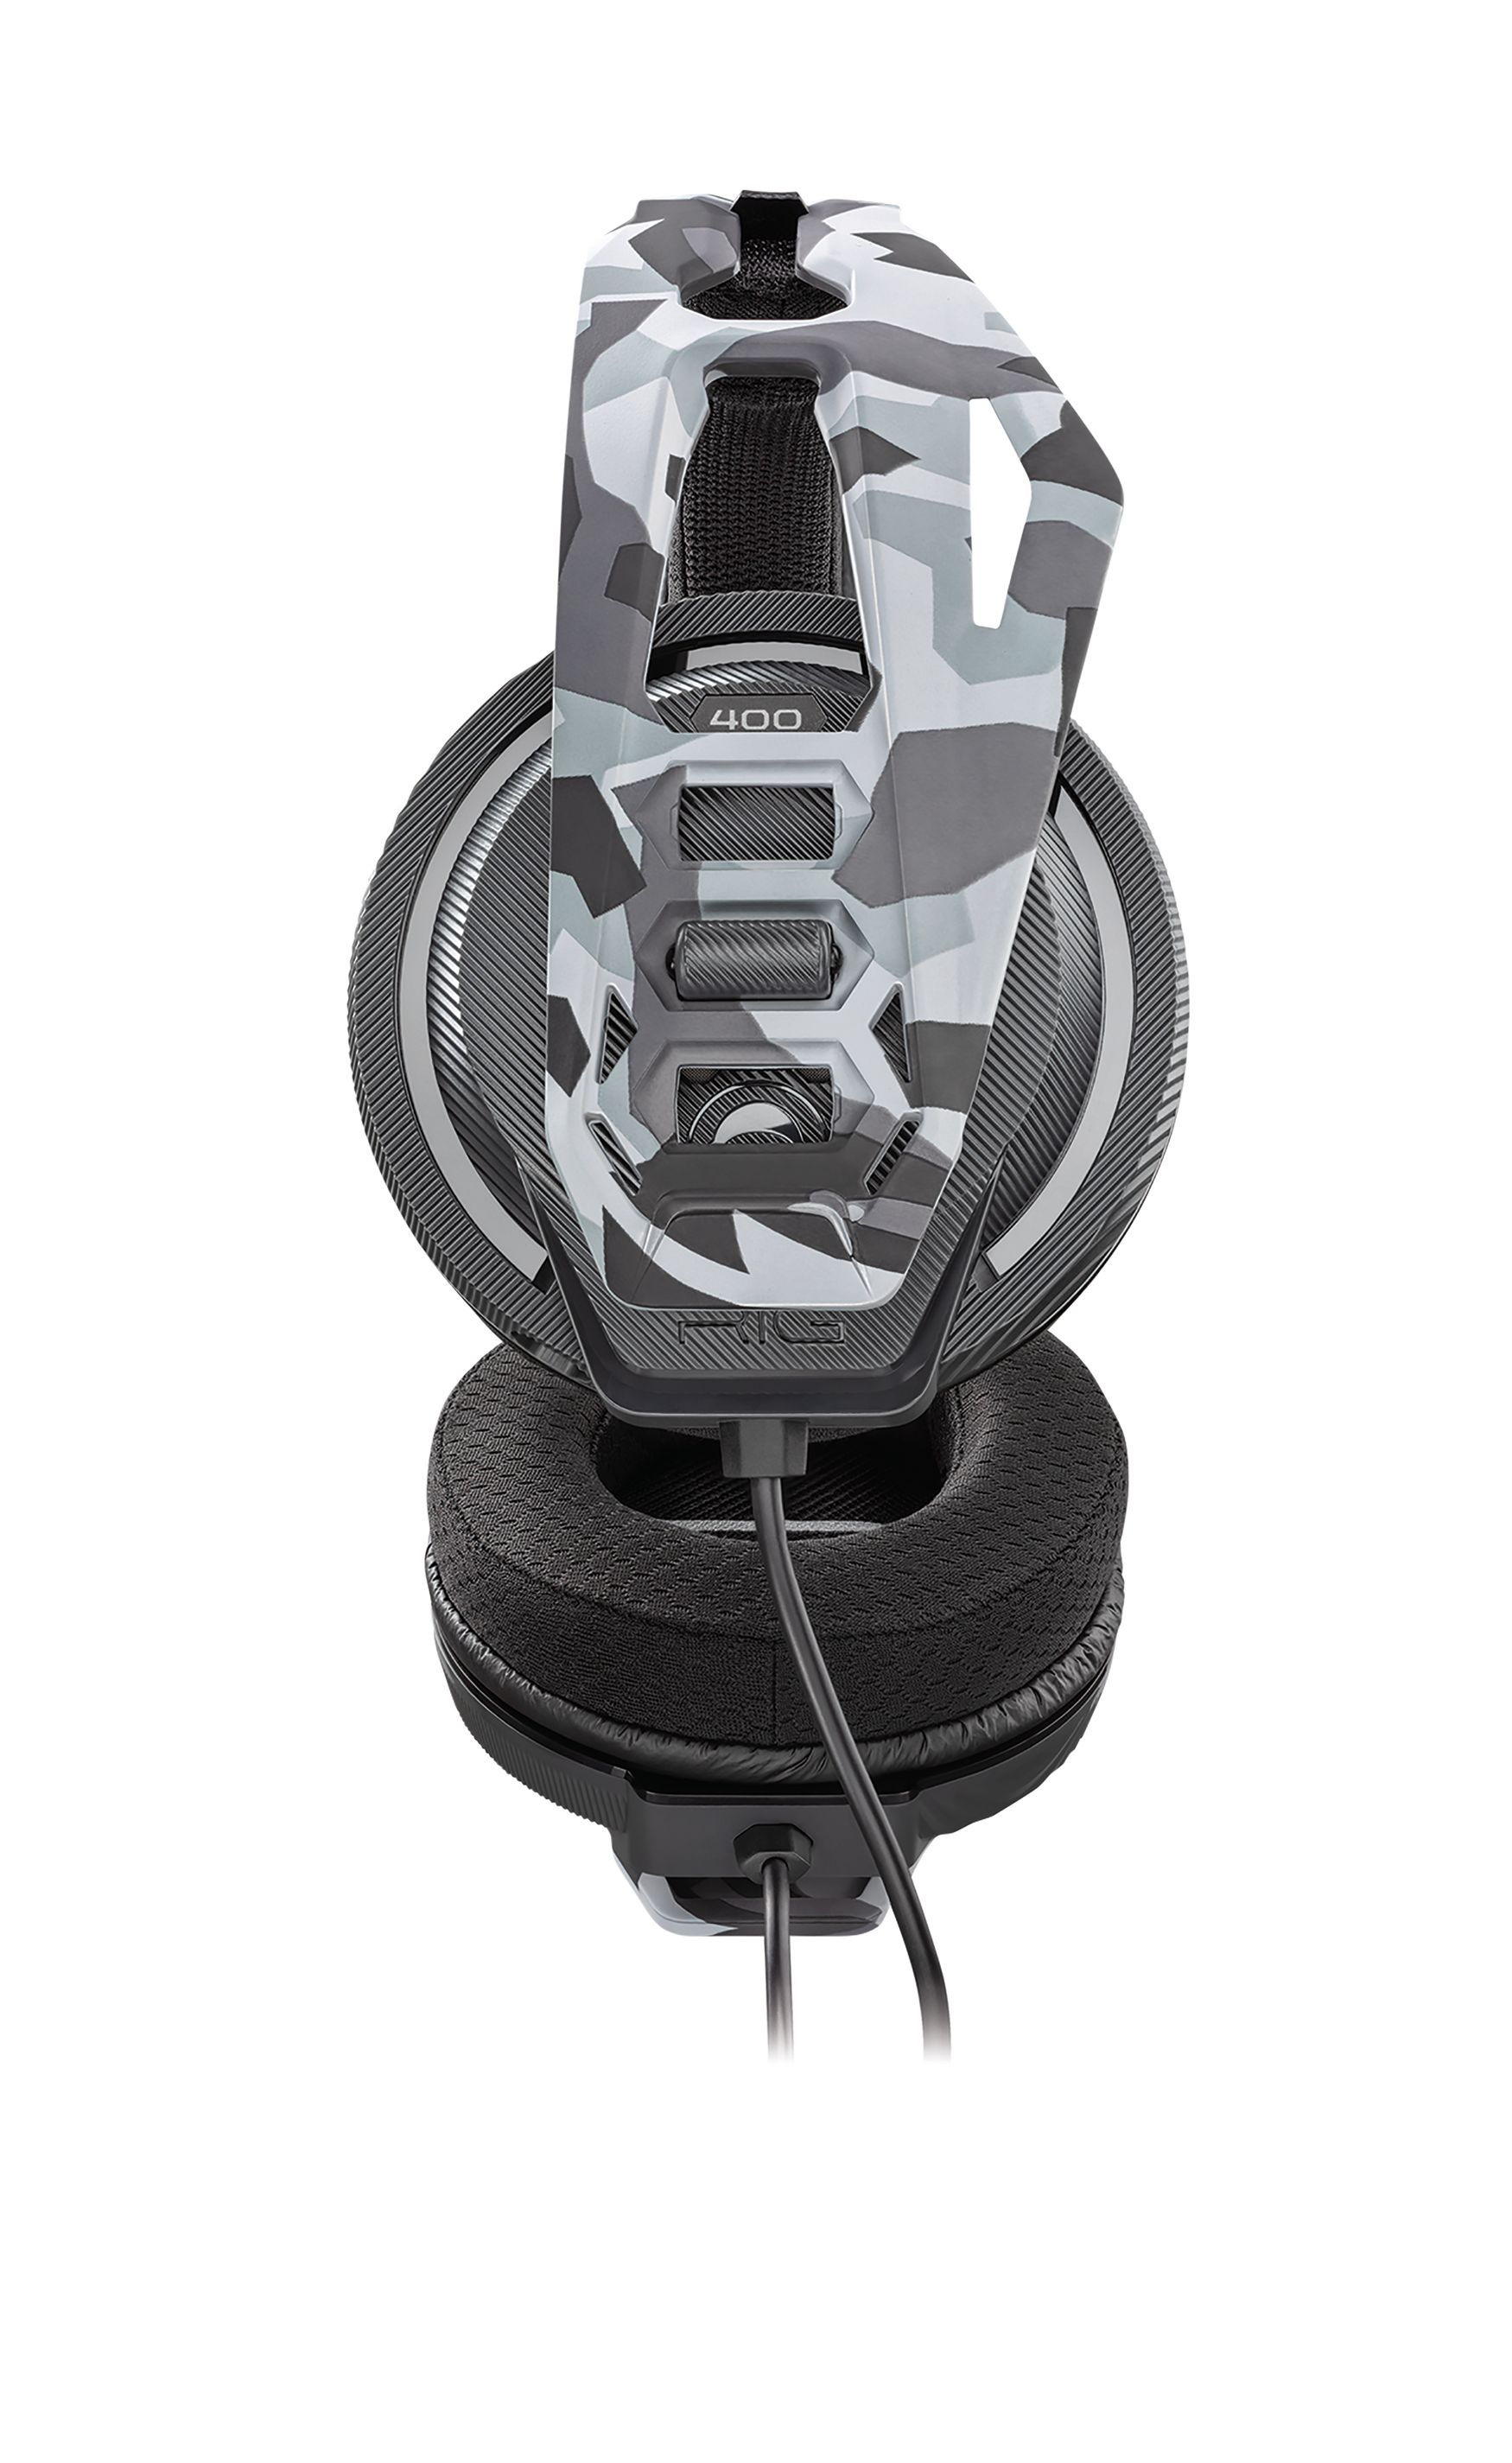 RIG 400HS Camo Stereo Gaming Headset for PlayStation 4 - image 3 of 6